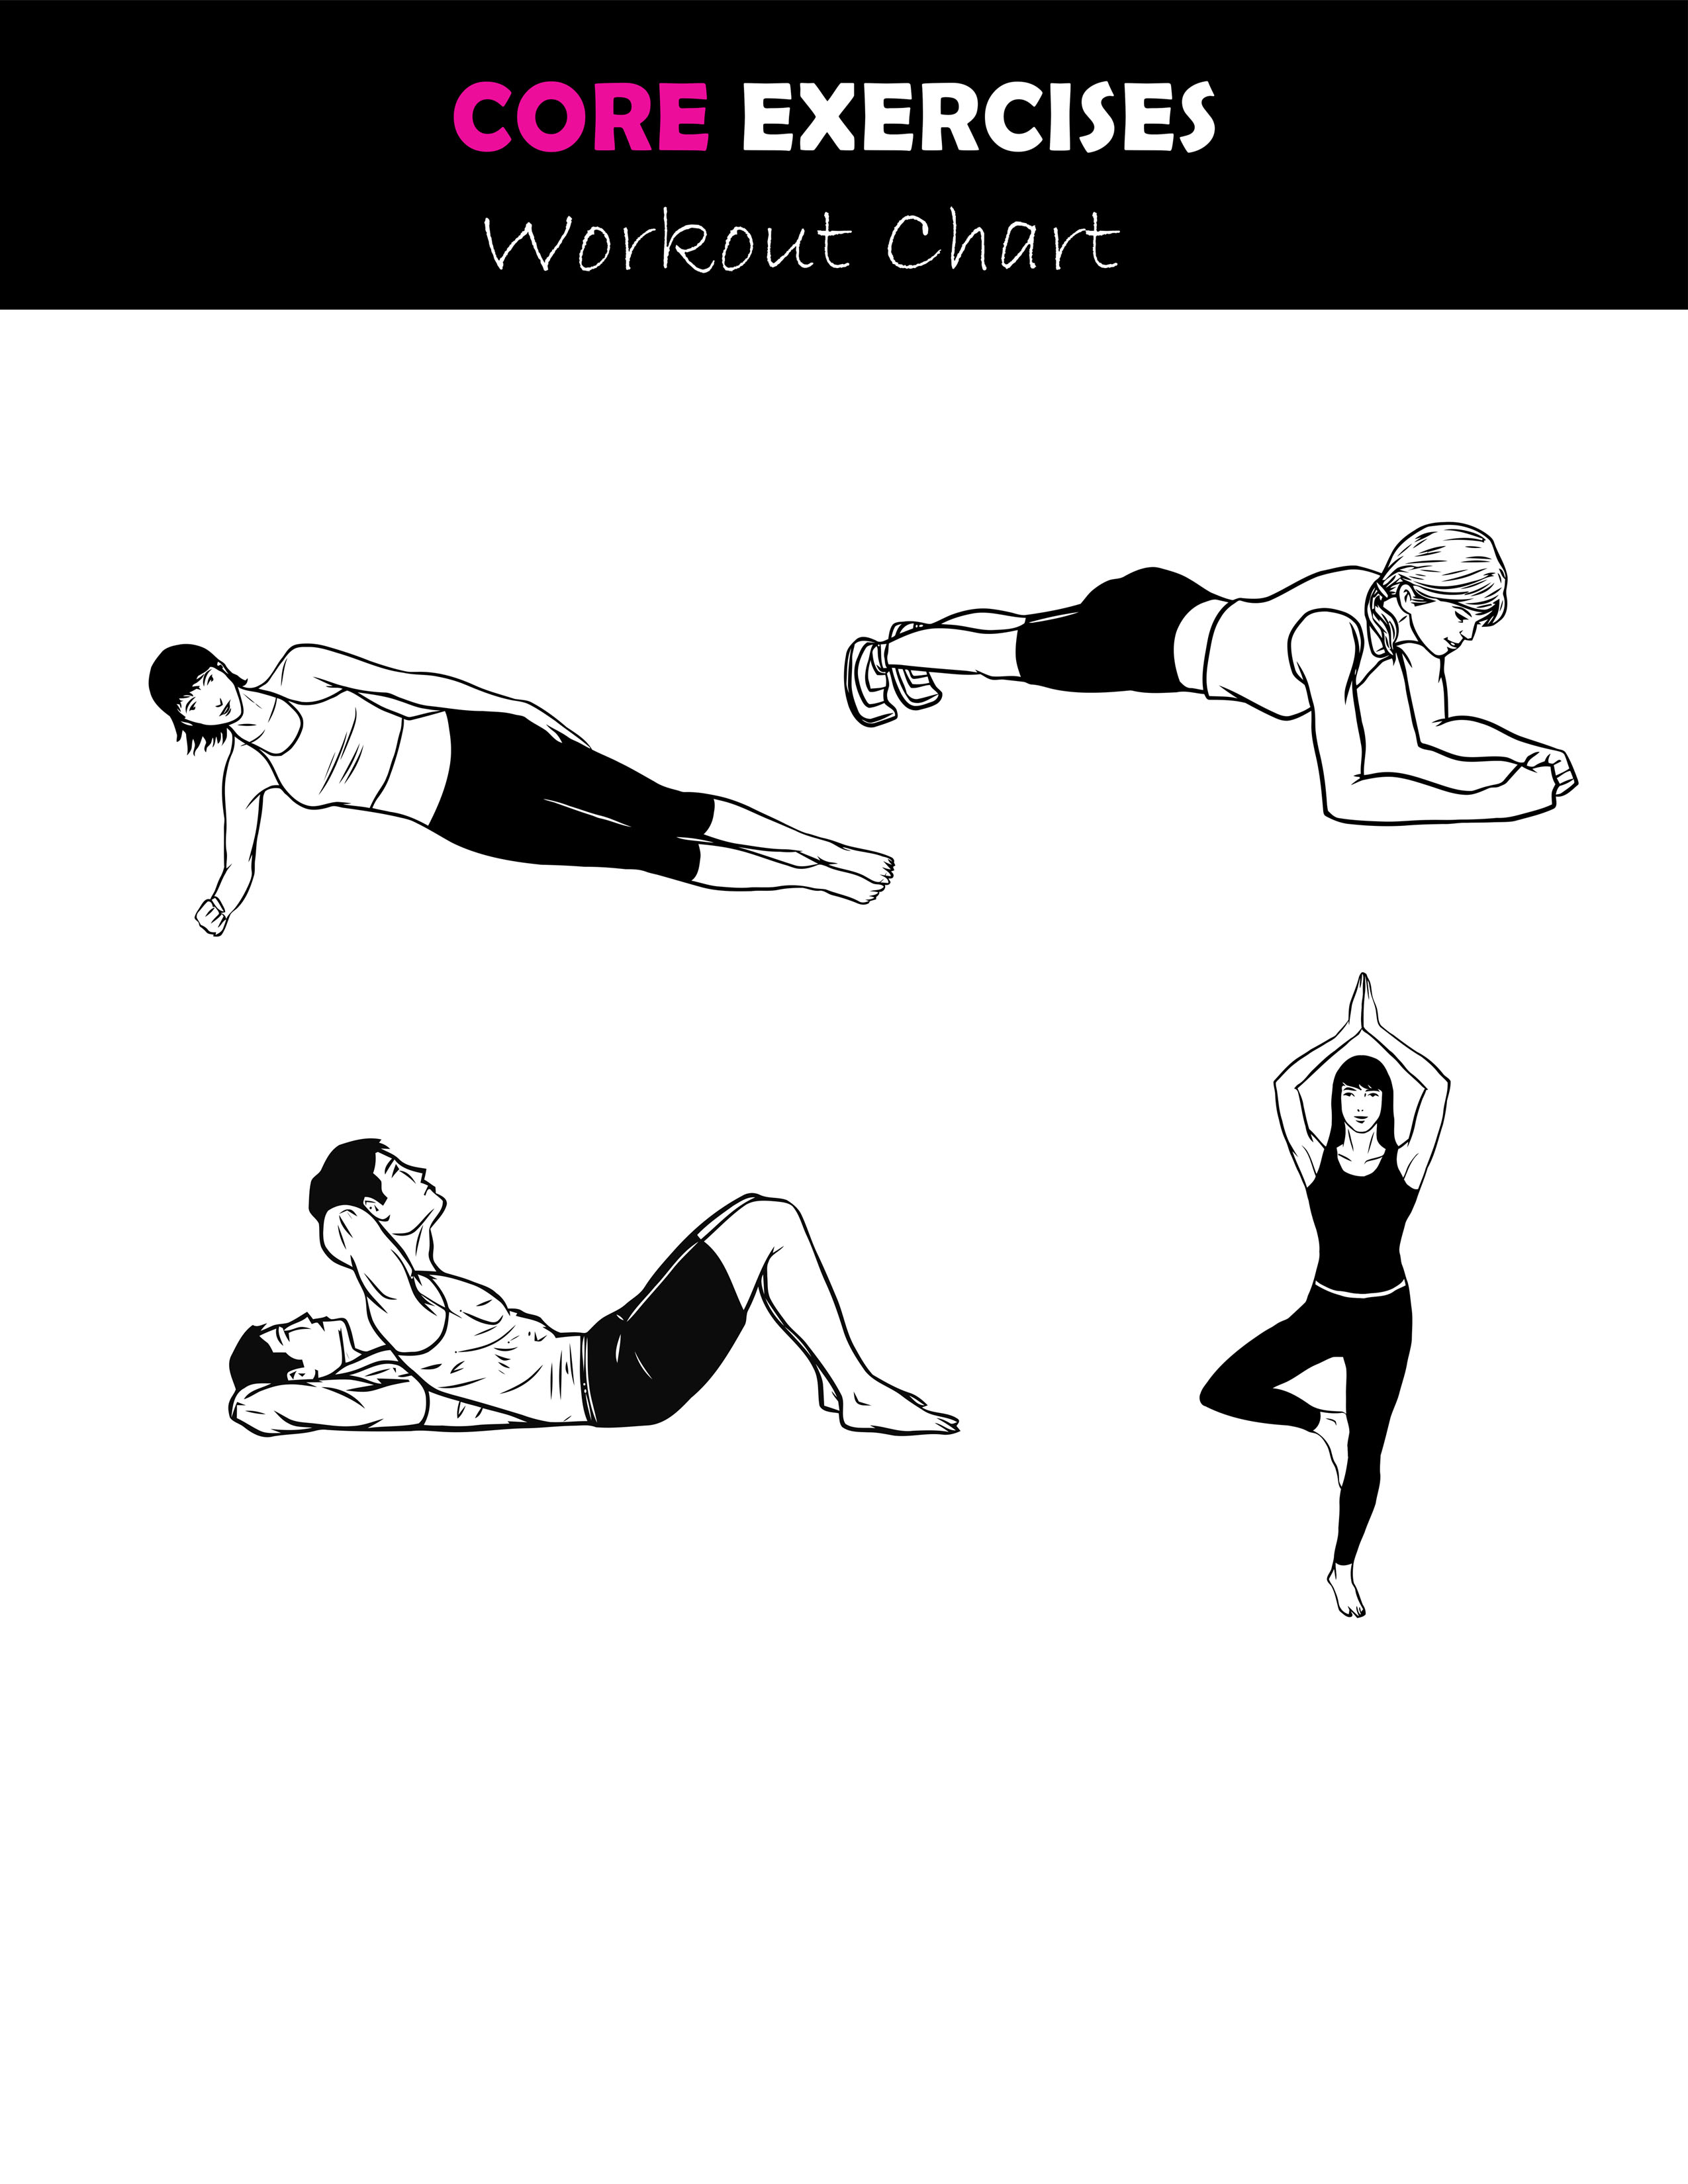 Core exercise workout chart you can download and print.